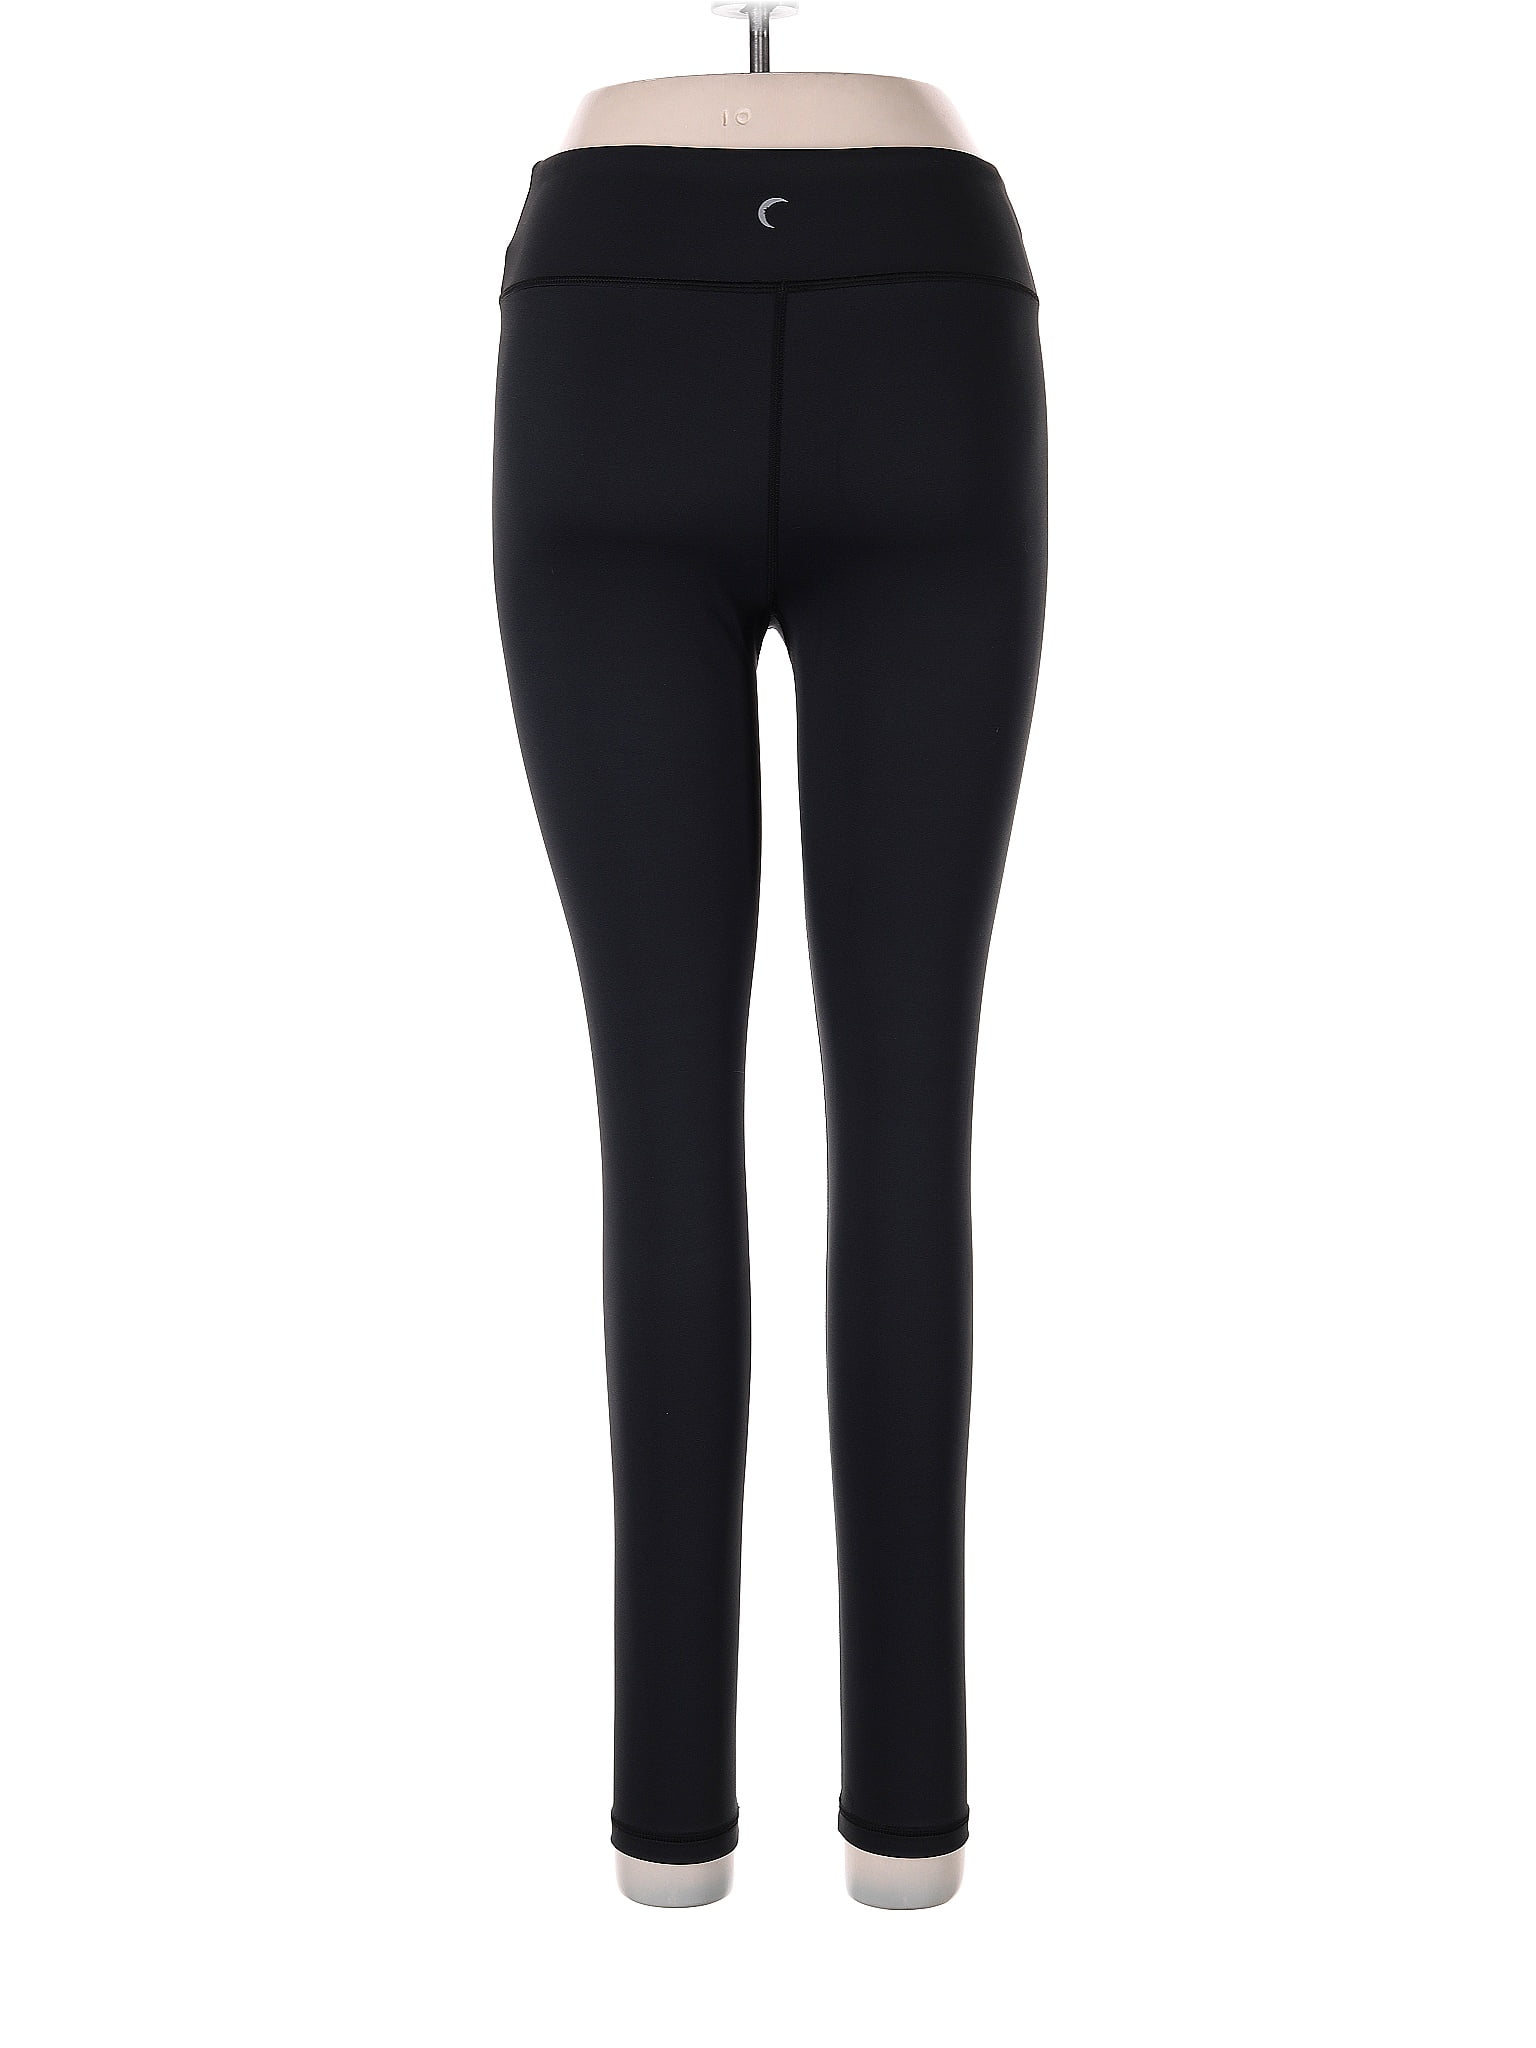 ZYIA Active Ind Rep - Girl, you can never have too many pairs of black  leggings!! Subtle styling details like textured, sculpted panels and mesh  ventilation zones give these classic leggings an